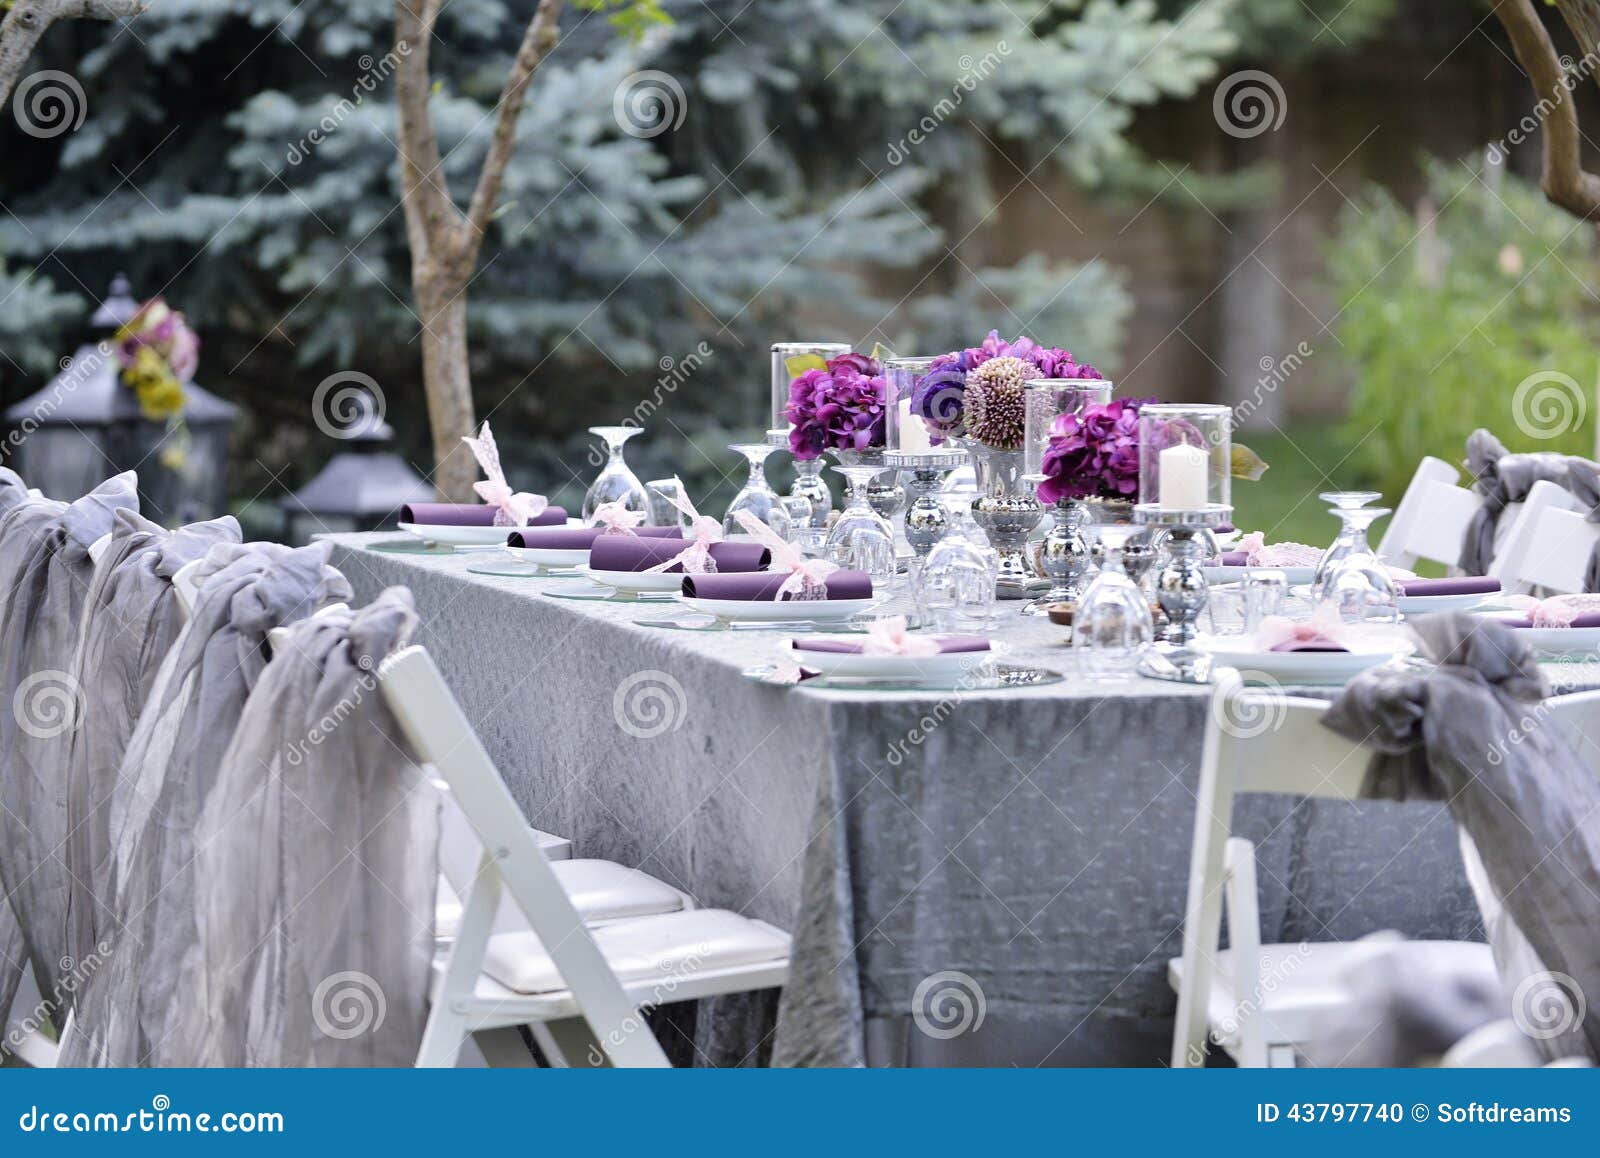 close-up catering table set